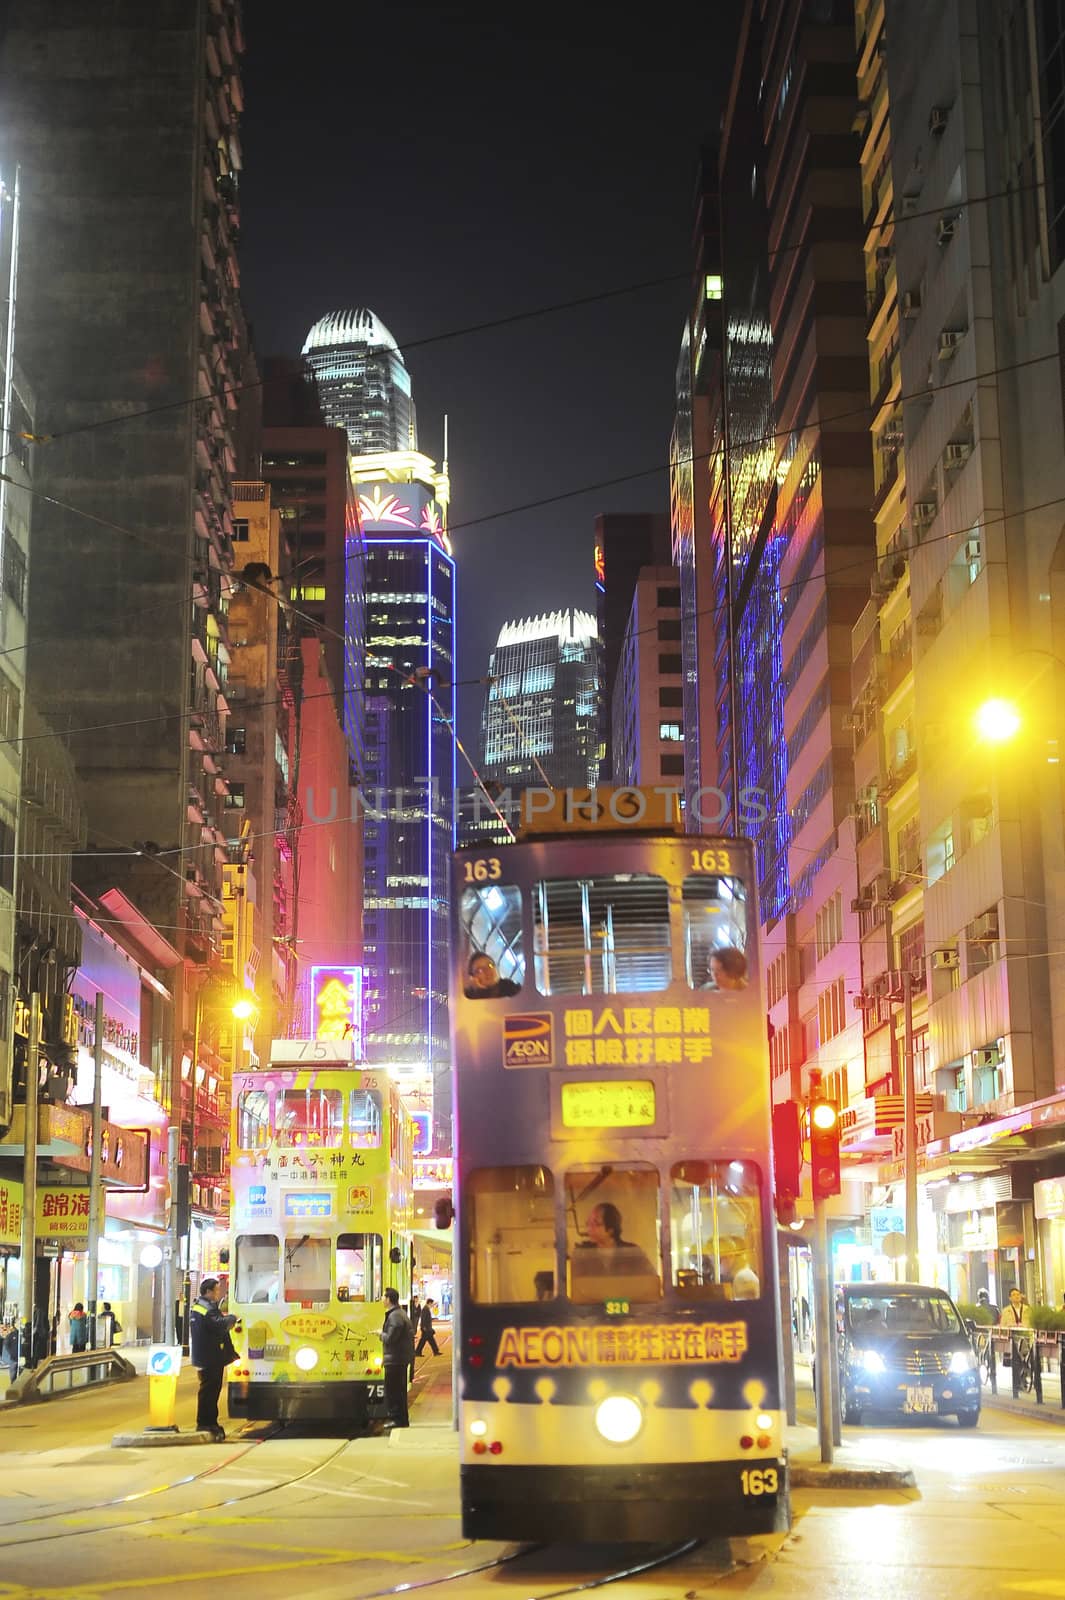 Hong Kong -  January 14, 2013: Trams on the street of Hong Kong. Trams in Hong Kong have not only been a form of transport for over 100 years, but also a major tourist attraction.